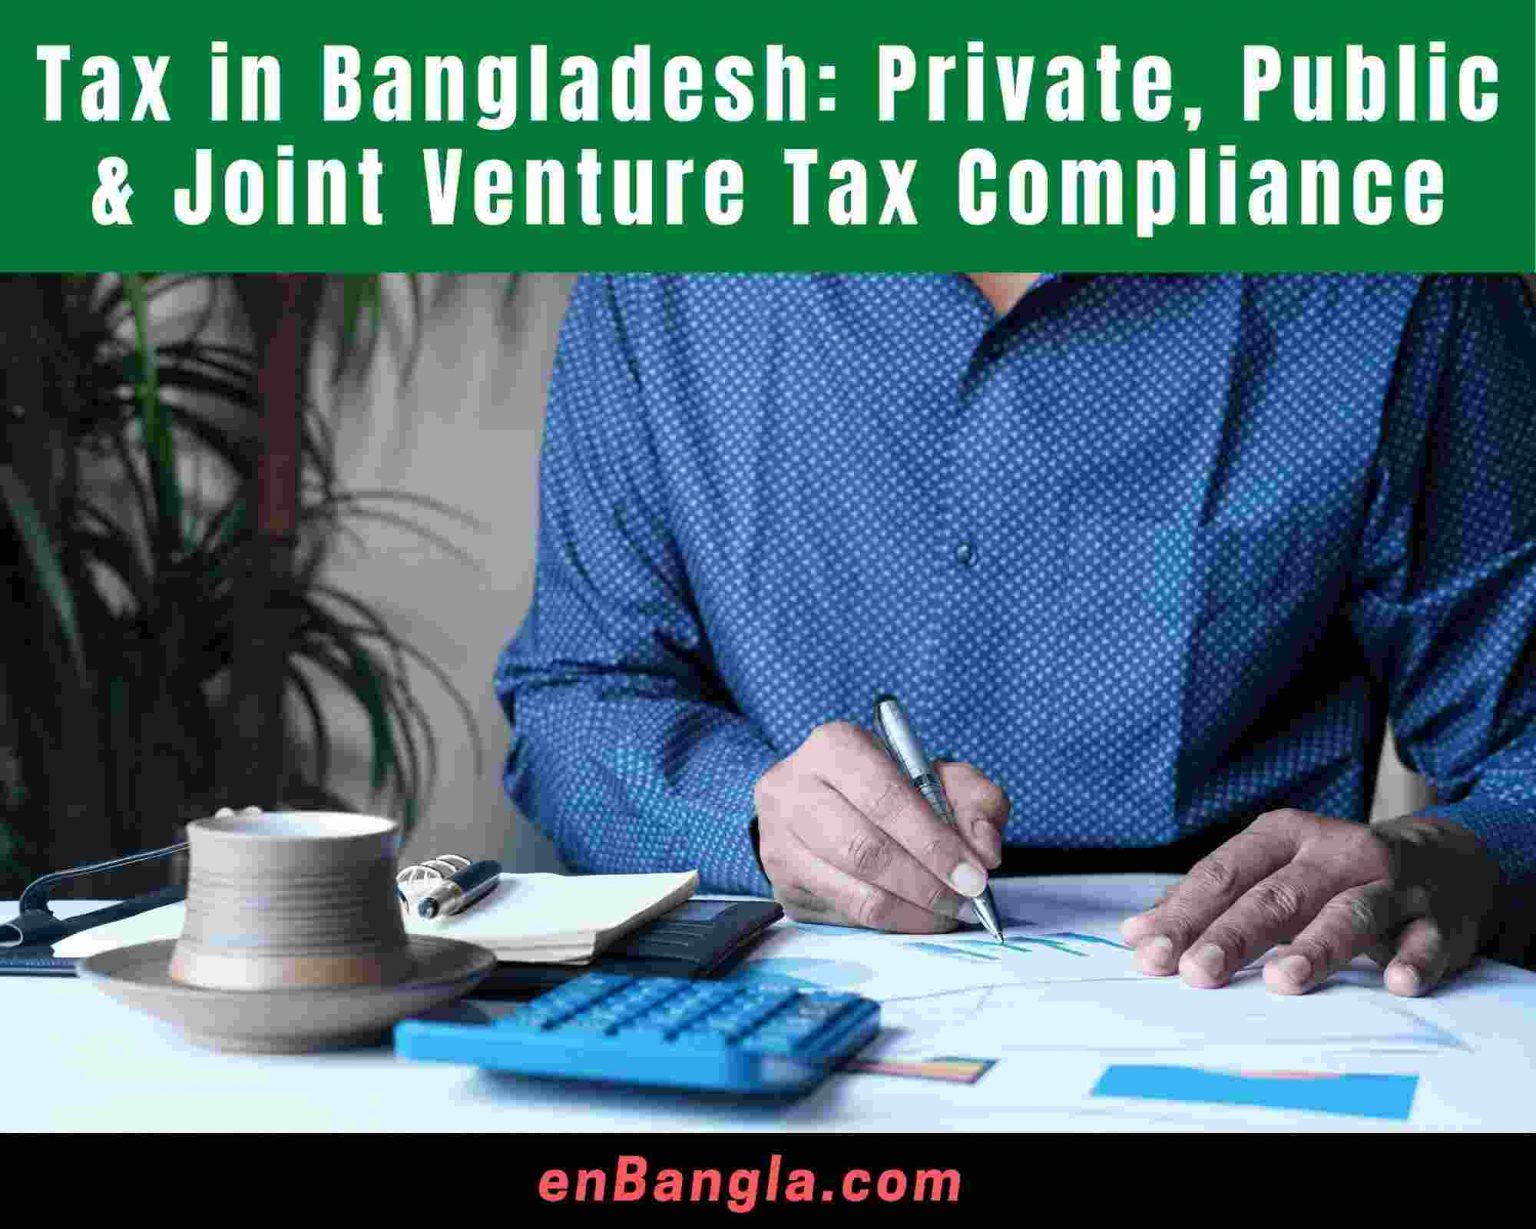 tax-in-bangladesh-private-public-joint-venture-tax-compliance-2022